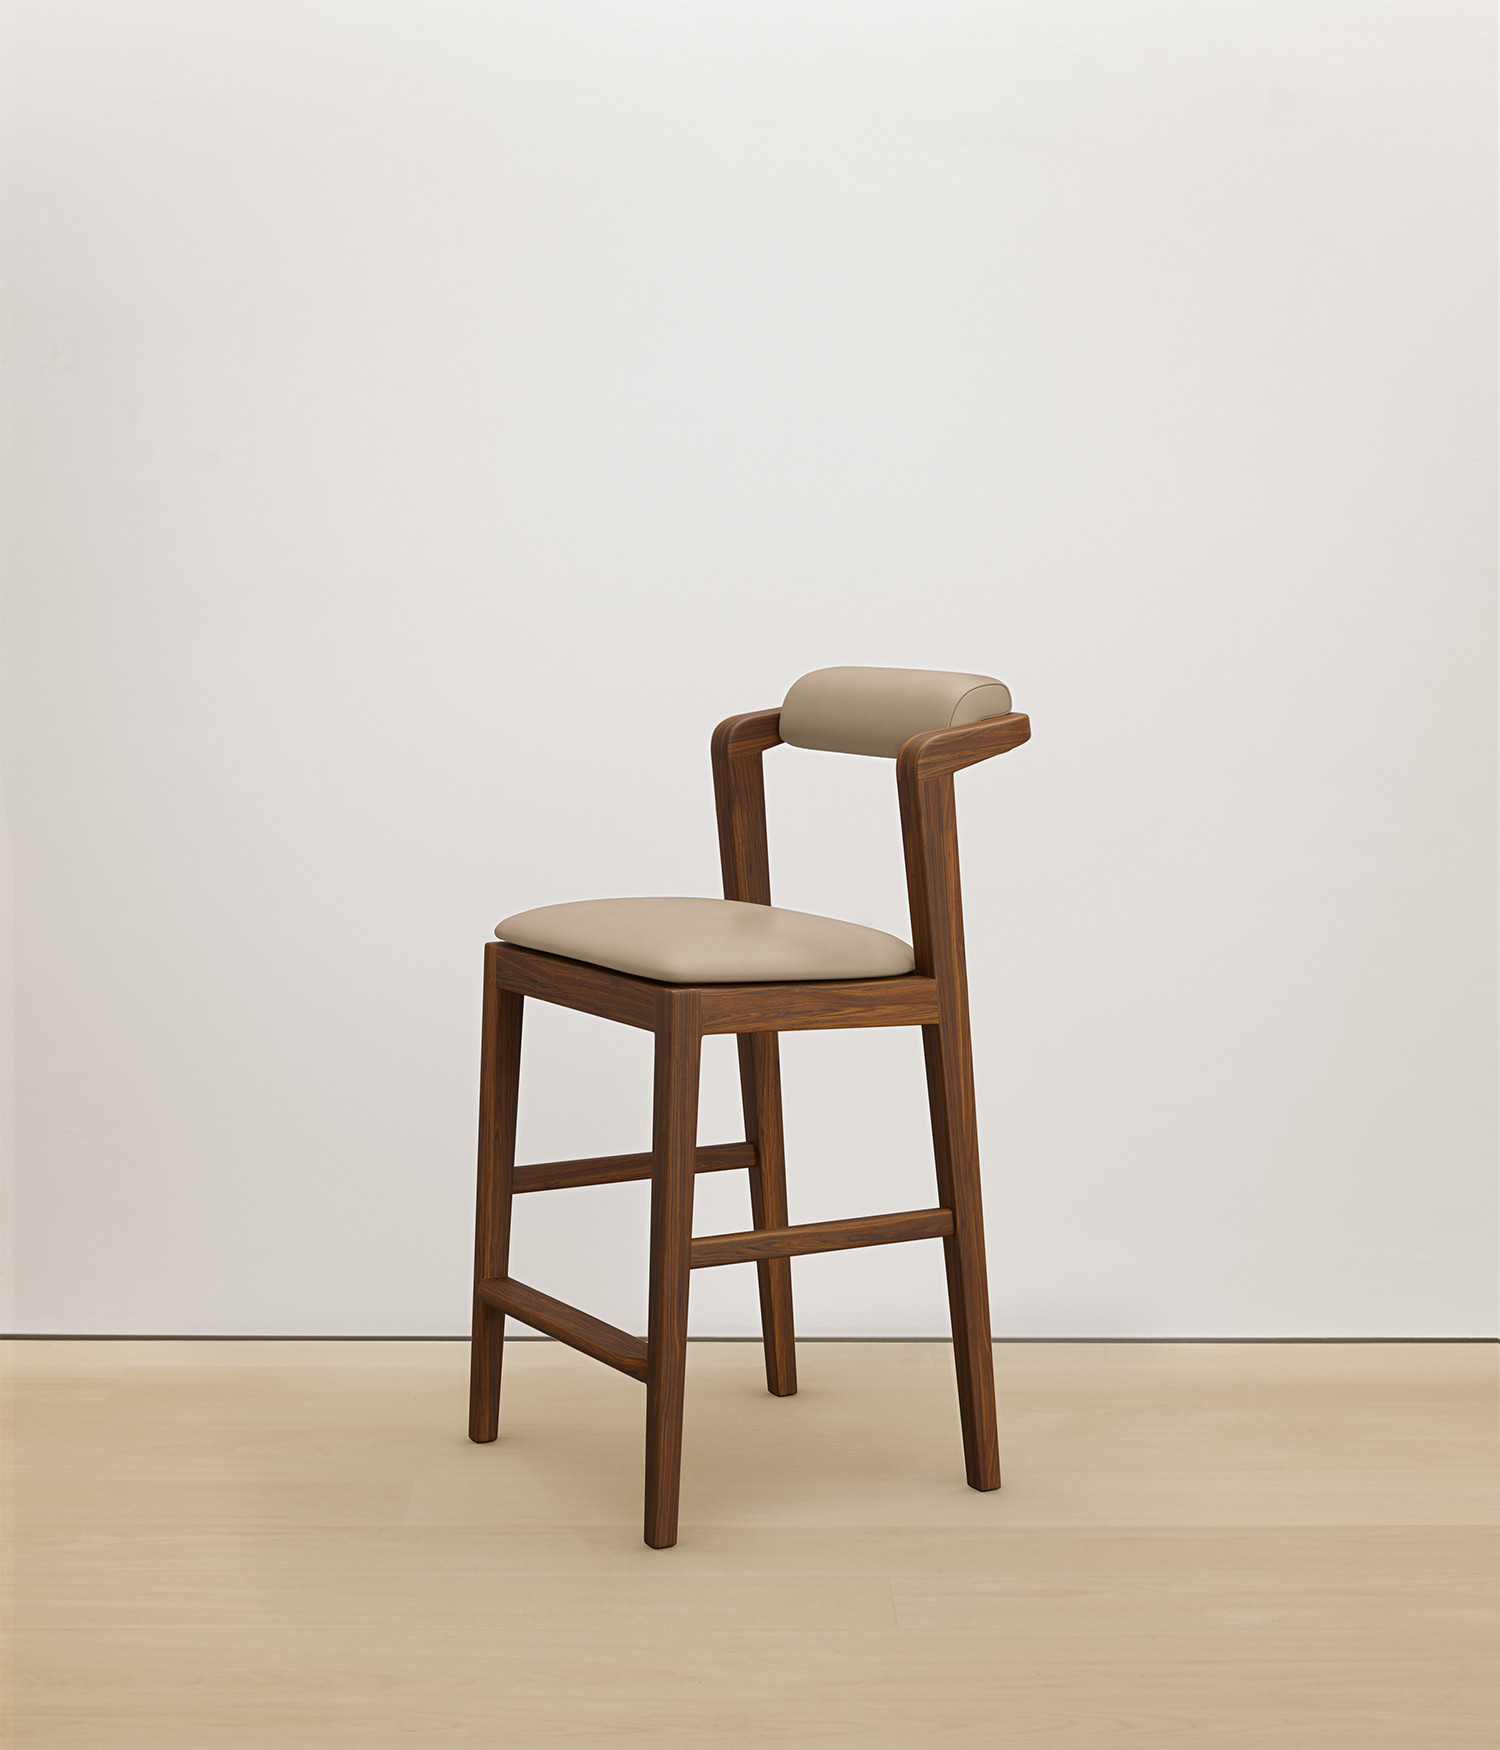  walnut stool with cream color upholstered seat